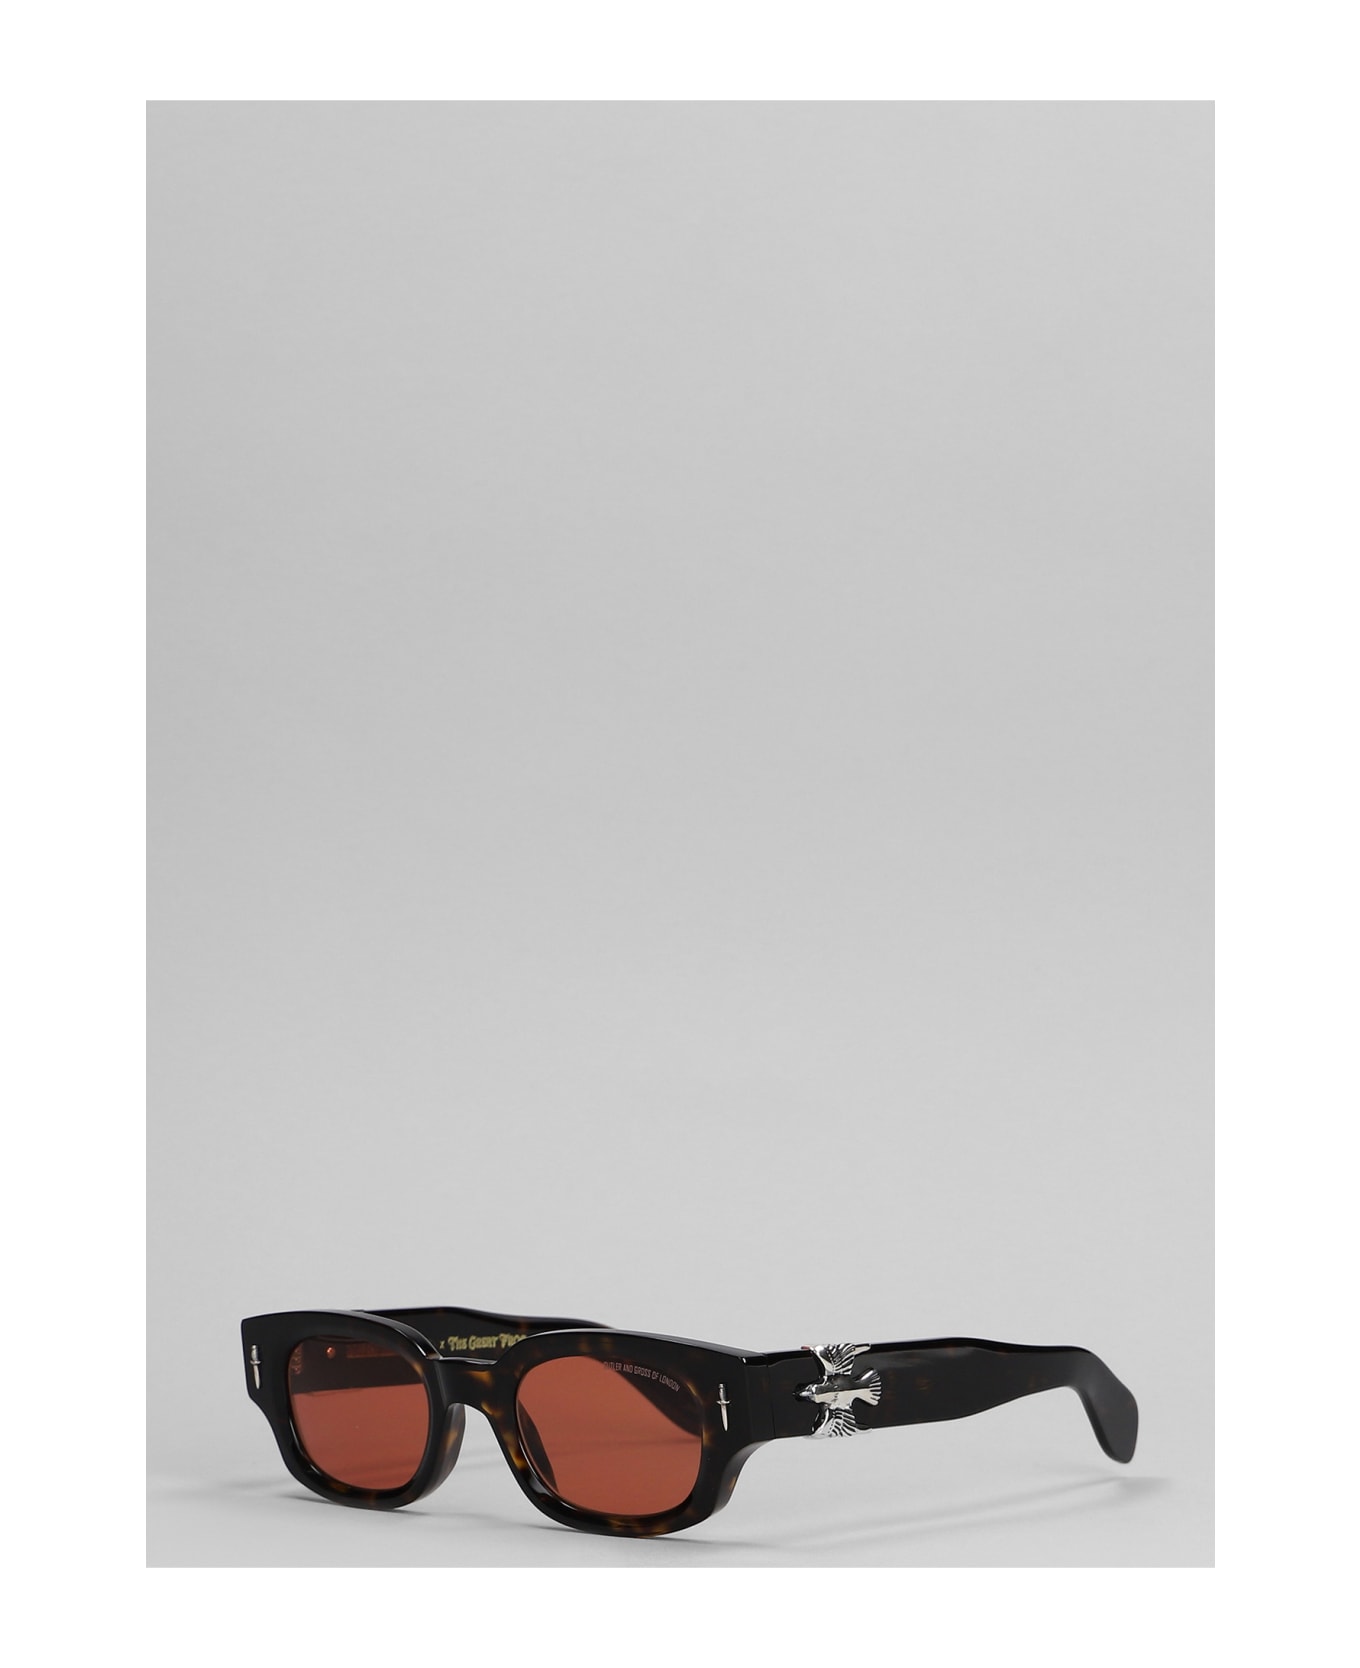 Cutler and Gross The Great Frog Sunglasses In Brown Acetate - brown